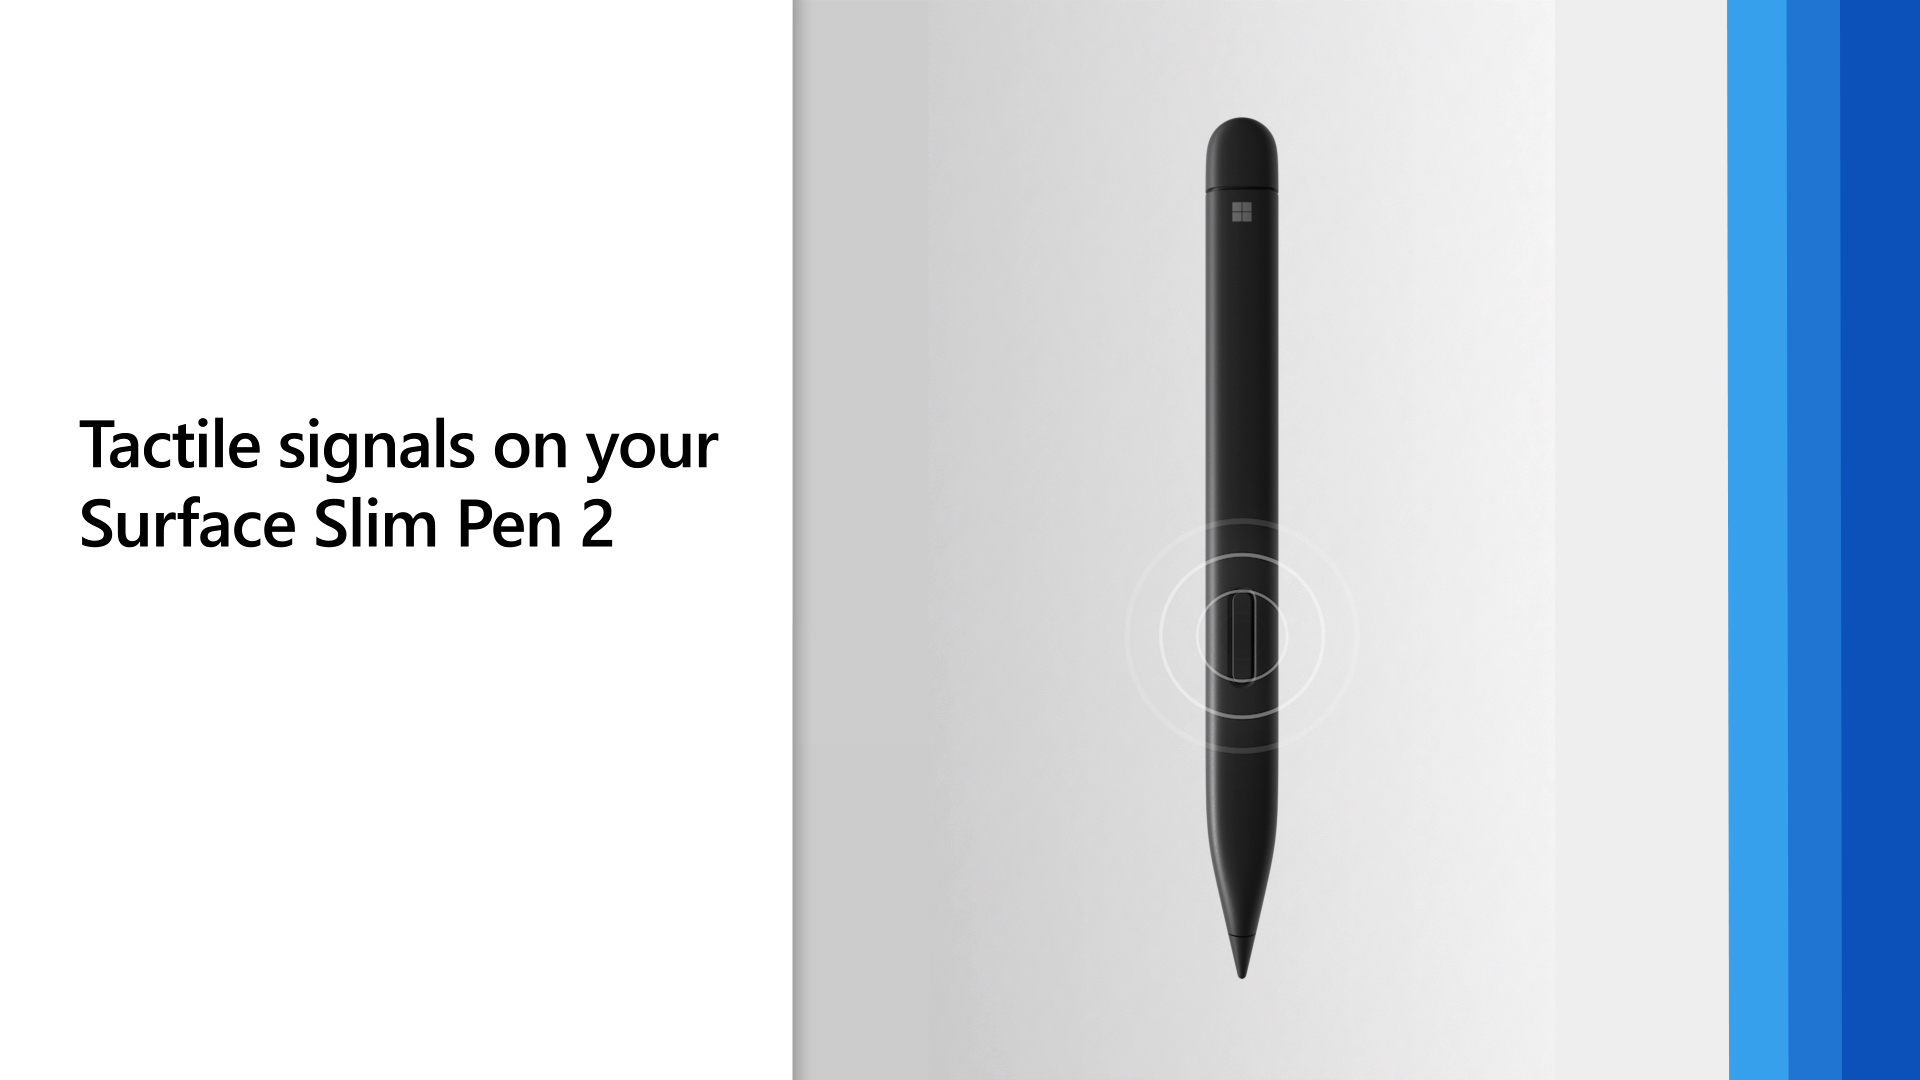 Use Surface 2 Pen Slim - Microsoft Support